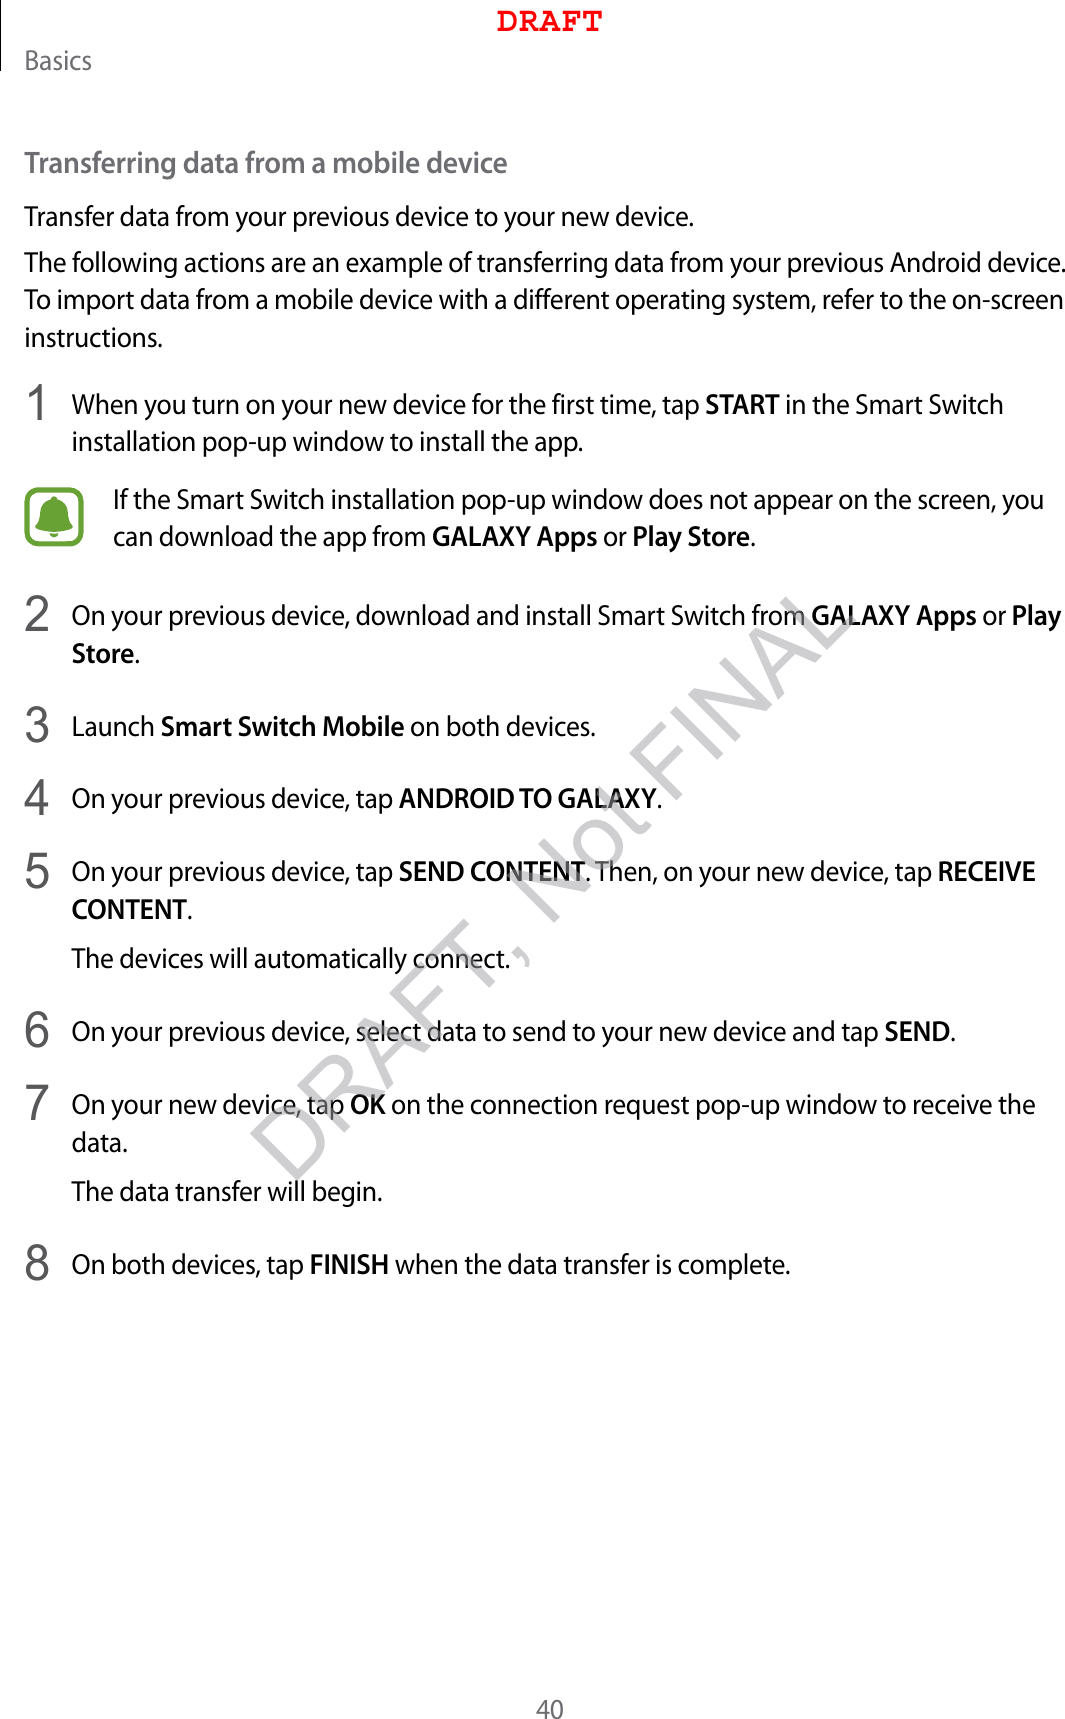 Basics40Transferring data from a mobile deviceTransfer data from your previous device to your new device.The following actions are an example of transferring data from your previous Android device. To import data from a mobile device with a different operating system, refer to the on-screen instructions.1  When you turn on your new device for the first time, tap START in the Smart Switch installation pop-up window to install the app.If the Smart Switch installation pop-up window does not appear on the screen, you can download the app from GALAXY Apps or Play Store.2  On your previous device, download and install Smart Switch from GALAXY Apps or Play Store.3  Launch Smart Switch Mobile on both devices.4  On your previous device, tap ANDROID TO GALAXY.5  On your previous device, tap SEND CONTENT. Then, on your new device, tap RECEIVE CONTENT.The devices will automatically connect.6  On your previous device, select data to send to your new device and tap SEND.7  On your new device, tap OK on the connection request pop-up window to receive the data.The data transfer will begin.8  On both devices, tap FINISH when the data transfer is complete.DRAFTDRAFT, Not FINAL